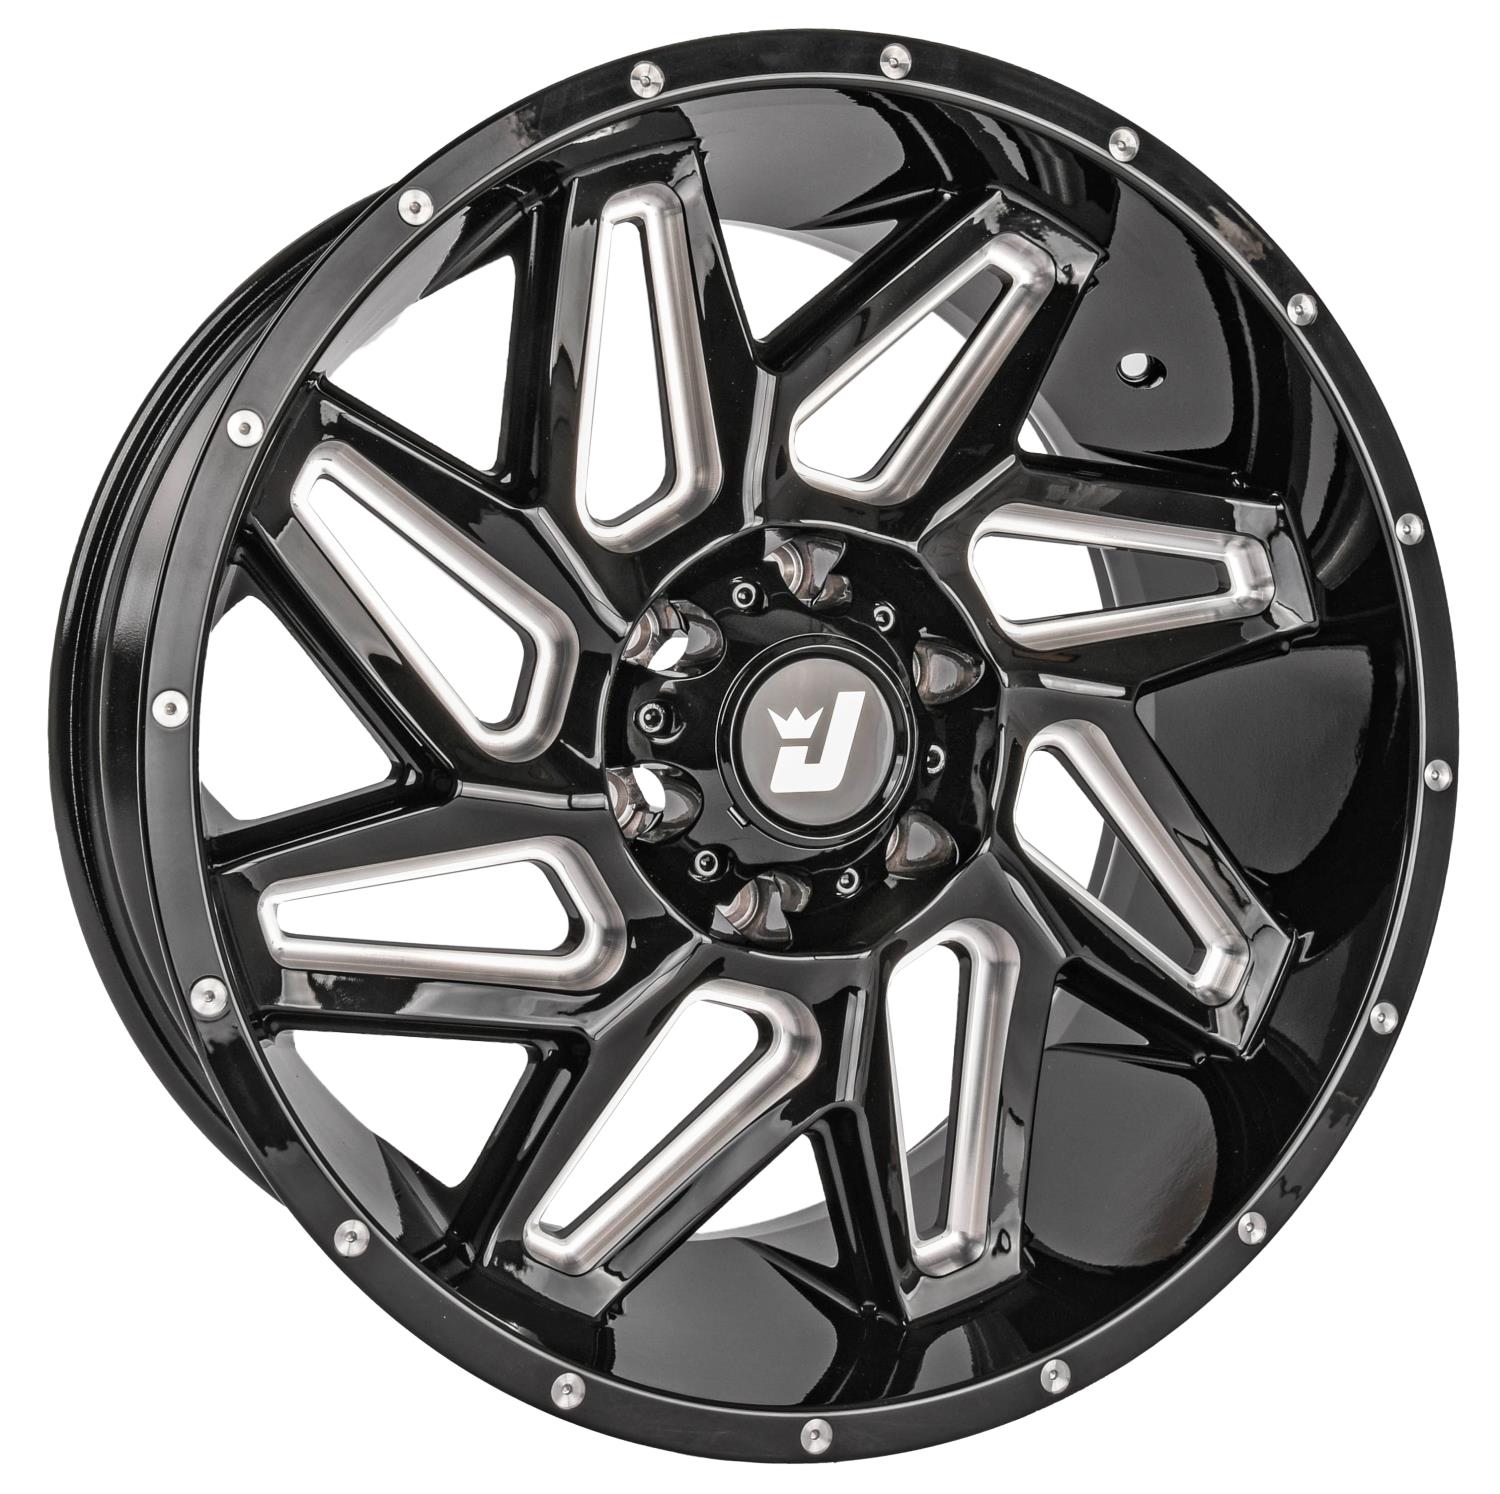 Catalyst Wheel [Size: 20" x 9"] Gloss Black with Milled Spokes